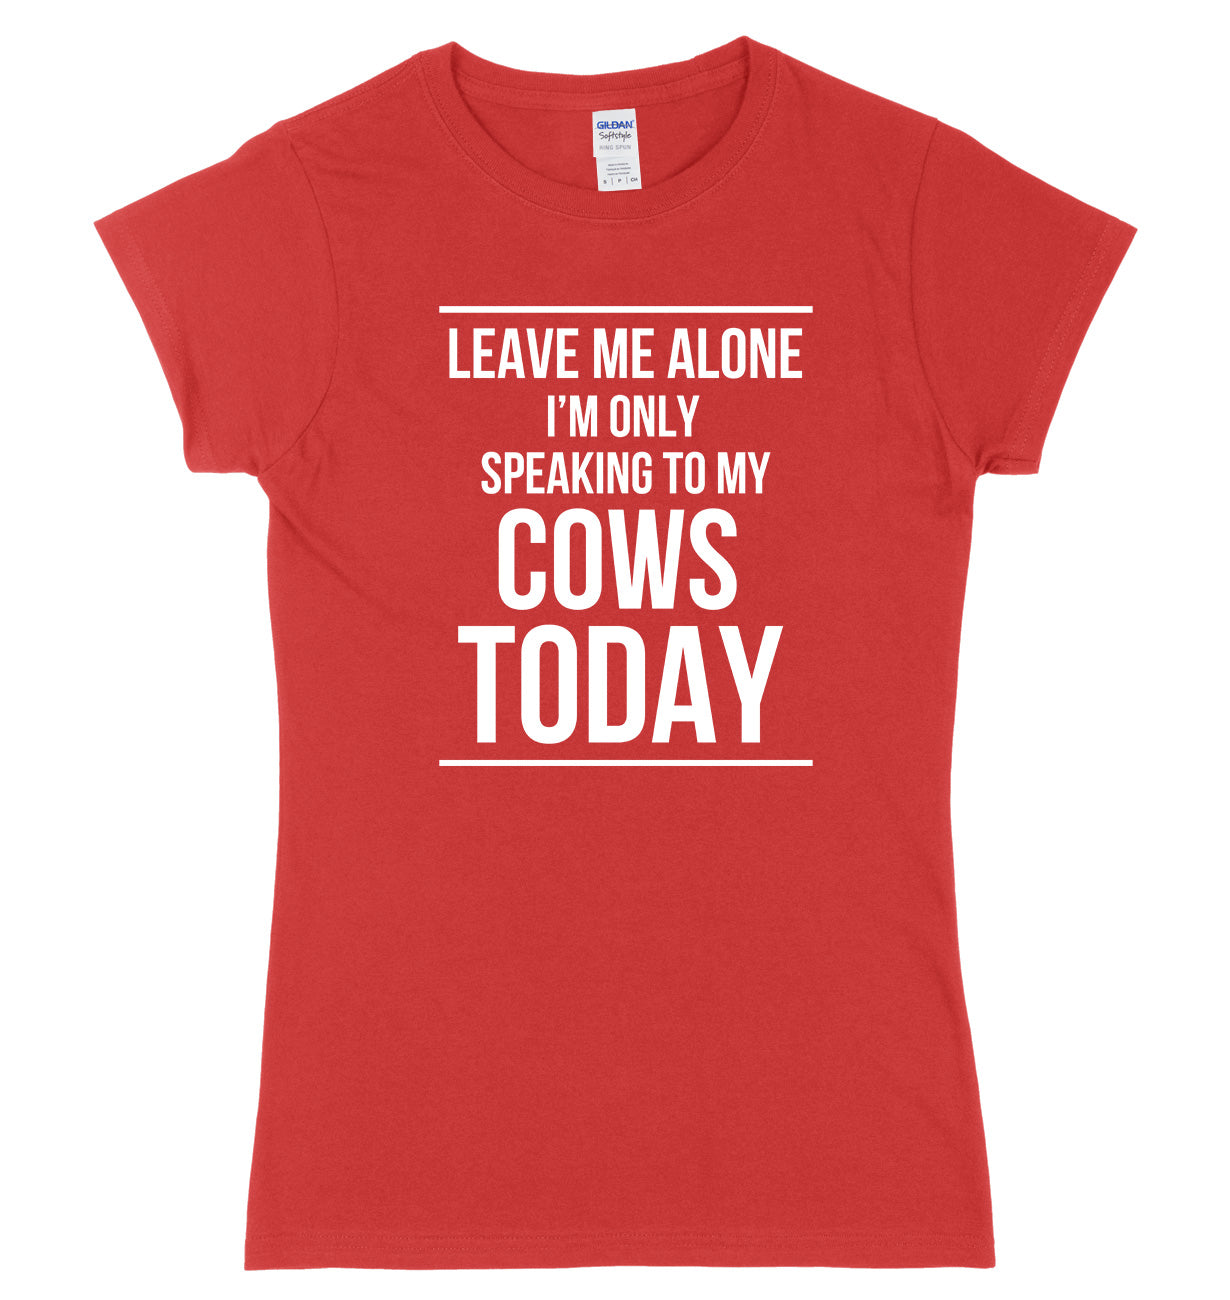 LEAVE ME ALONE I'M ONLY SPEAKING TO MY COWS TODAY FUNNY WOMENS LADIES SLIM FIT  T-SHIRT